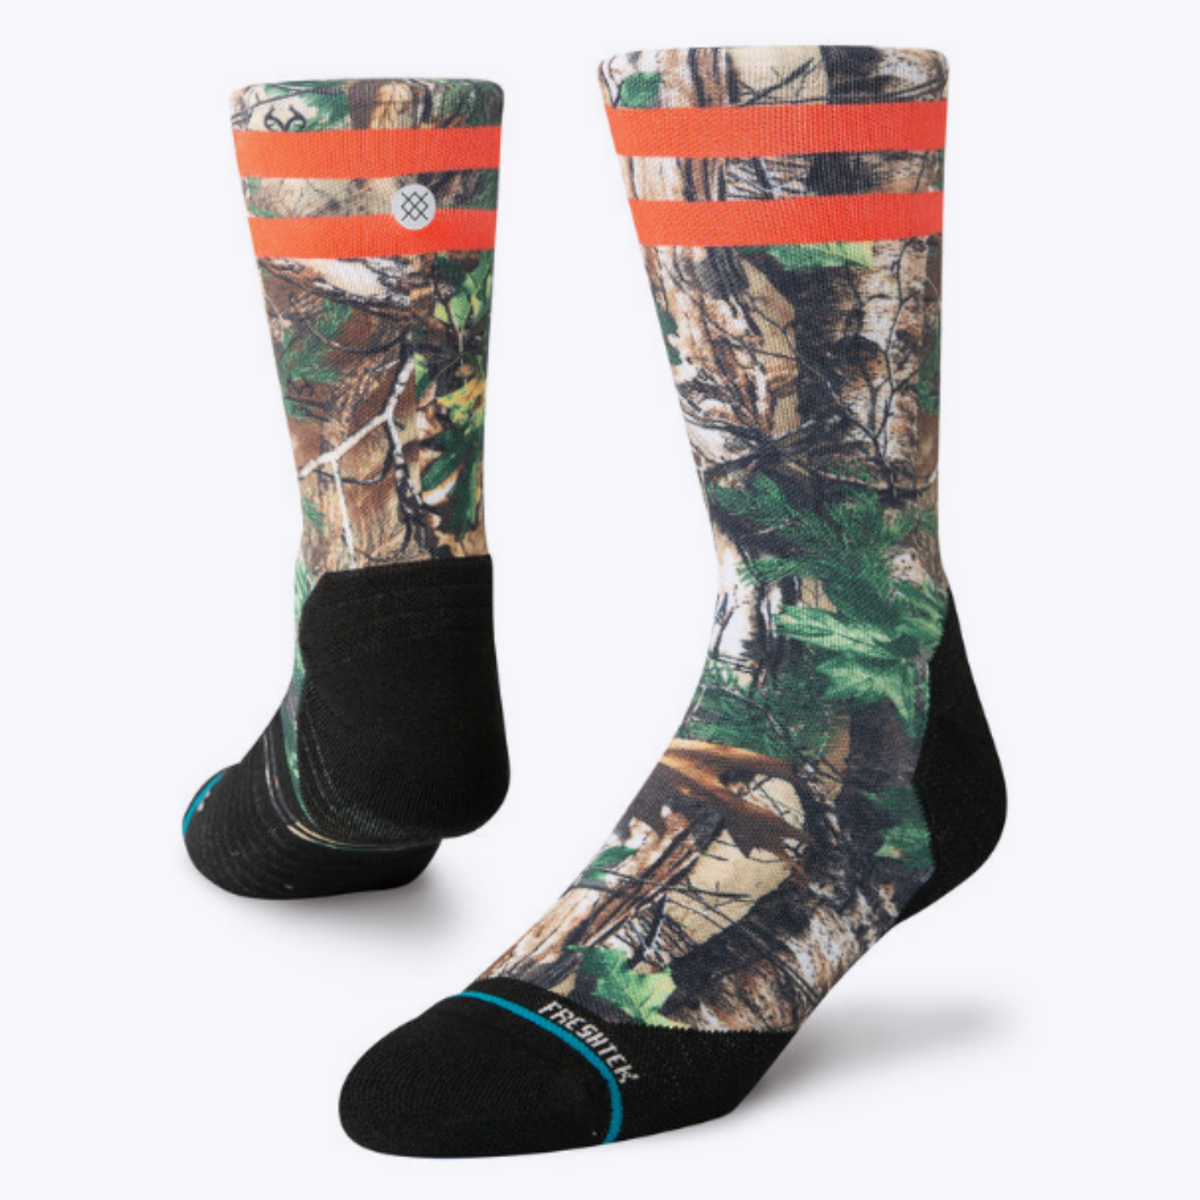 Stance Xtra Light Xtra Performance men&#39;s crew sock featuring all-over camouflage pattern and two orange stripes at top. Socks shown on display feet. 